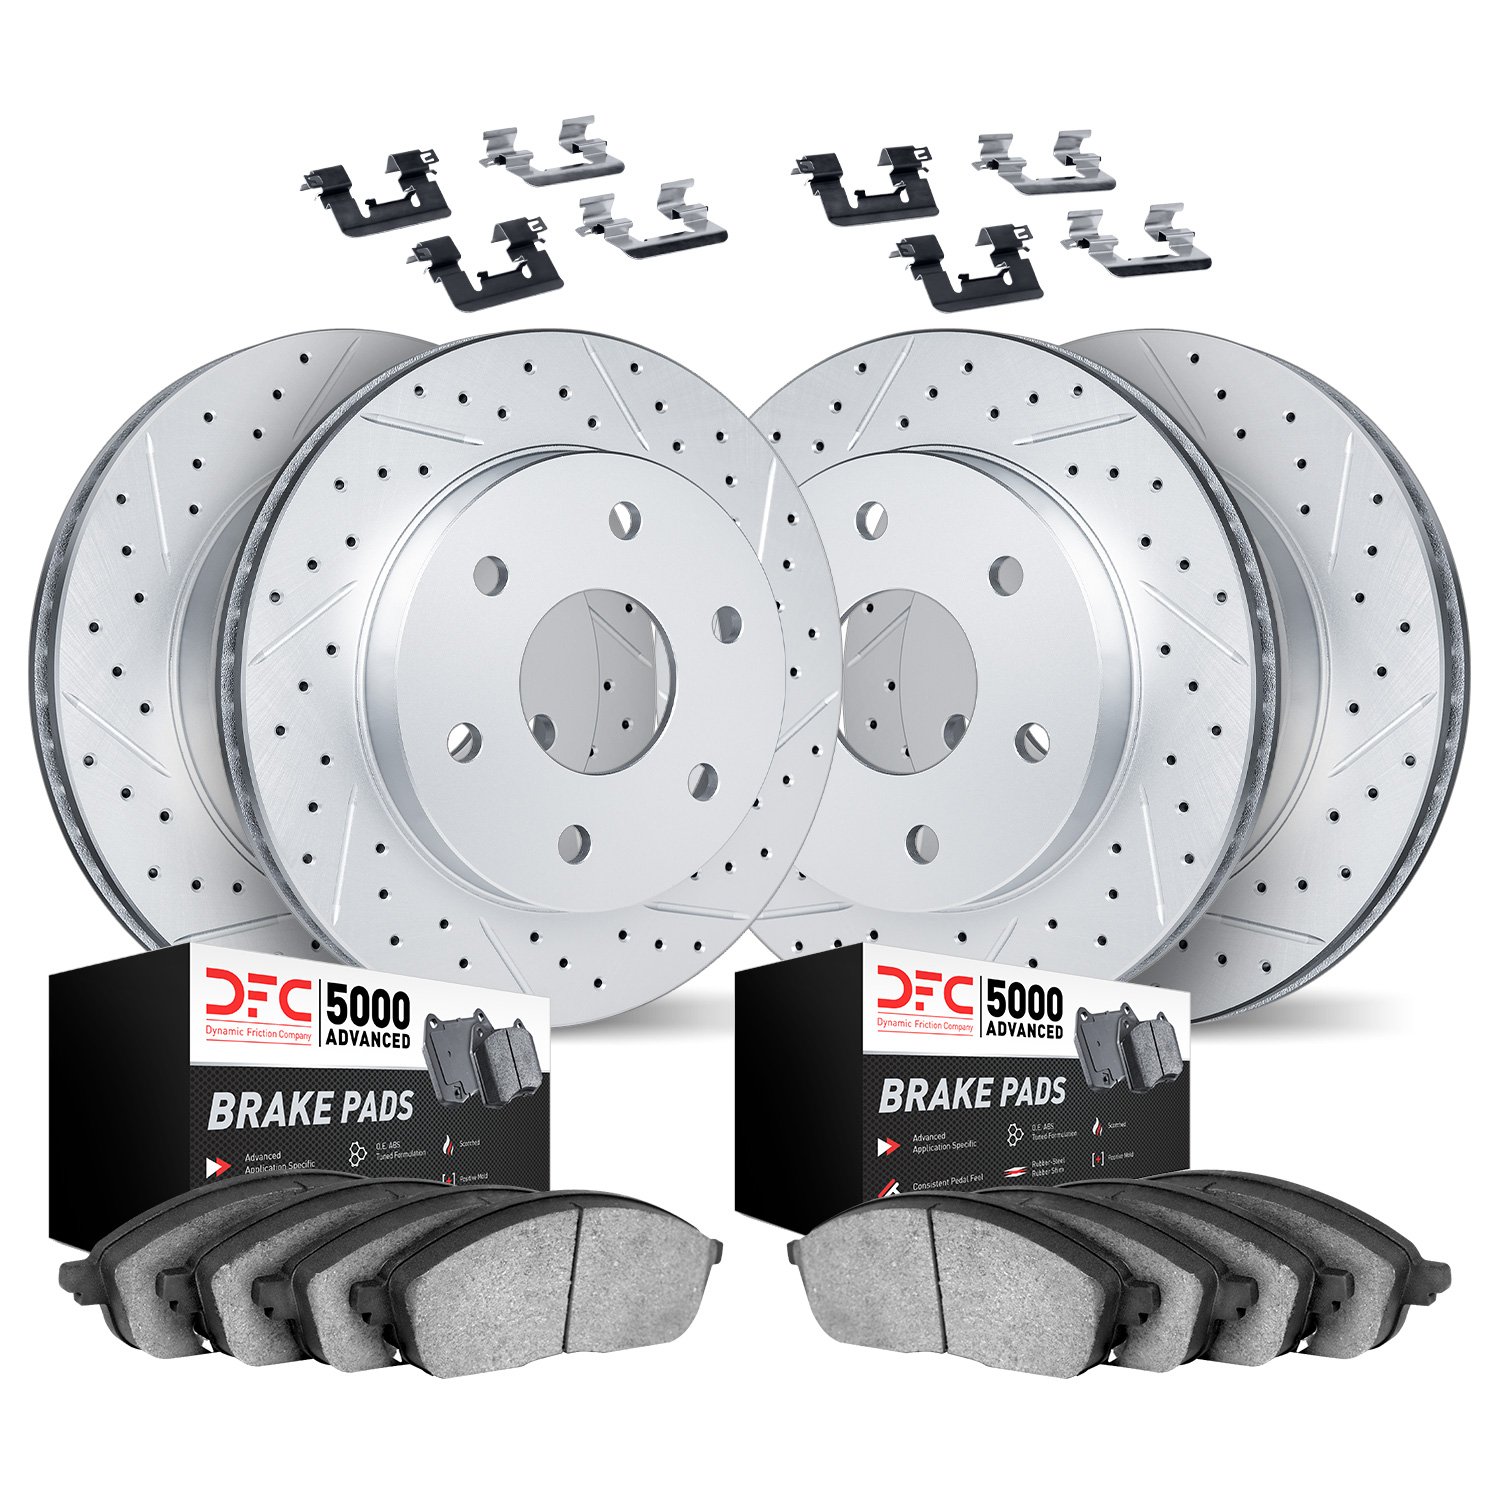 2514-48041 Geoperformance Drilled/Slotted Rotors w/5000 Advanced Brake Pads Kit & Hardware, 2015-2020 GM, Position: Front and Re